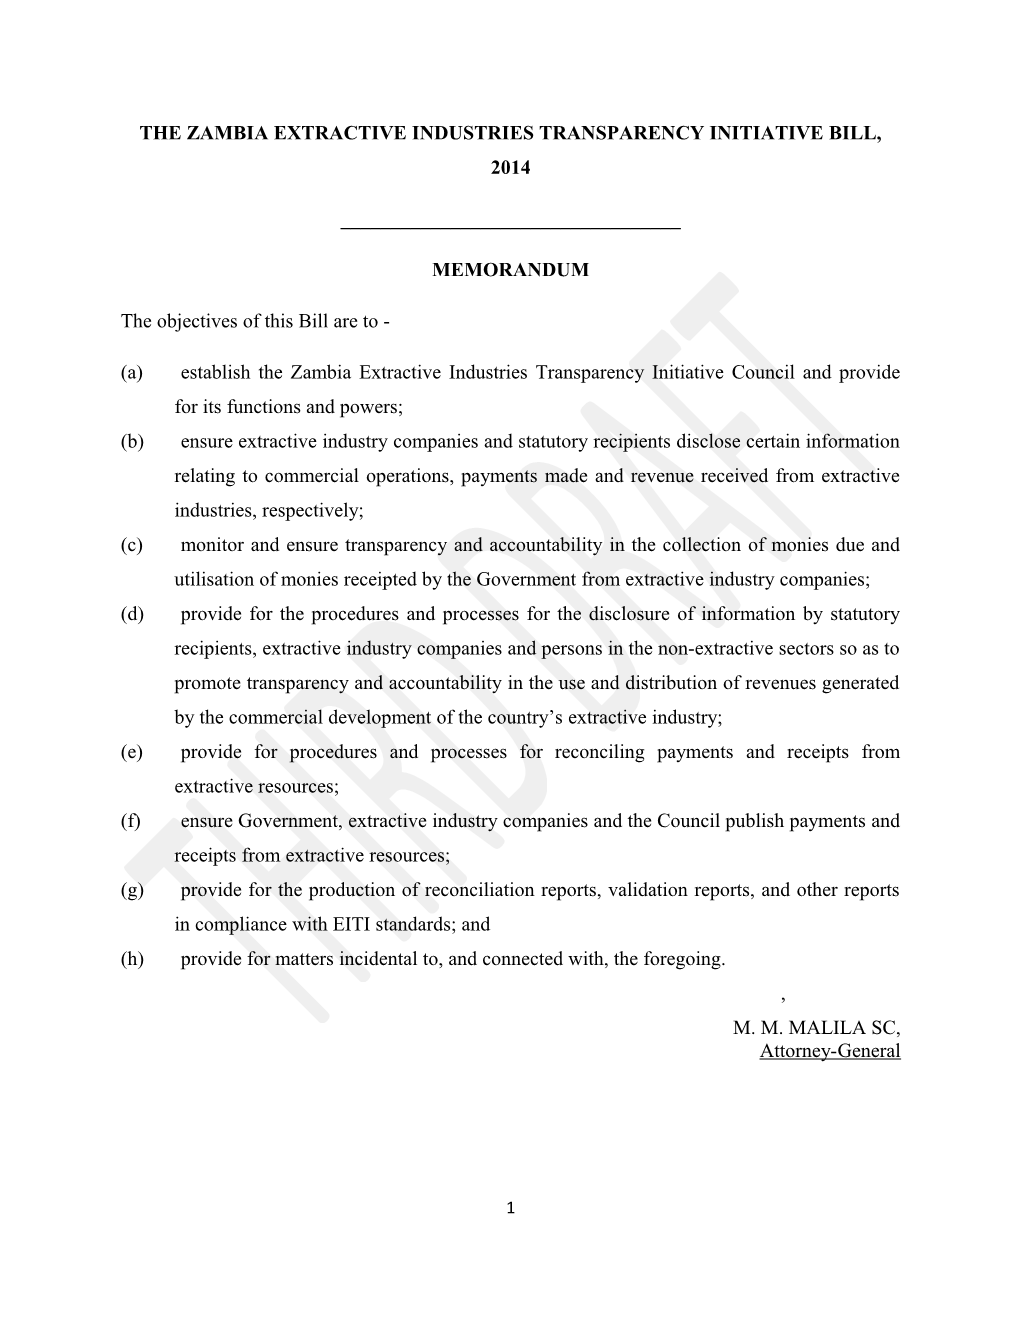 The Zambia Extractive Industries Transparency Initiative Bill, 2014